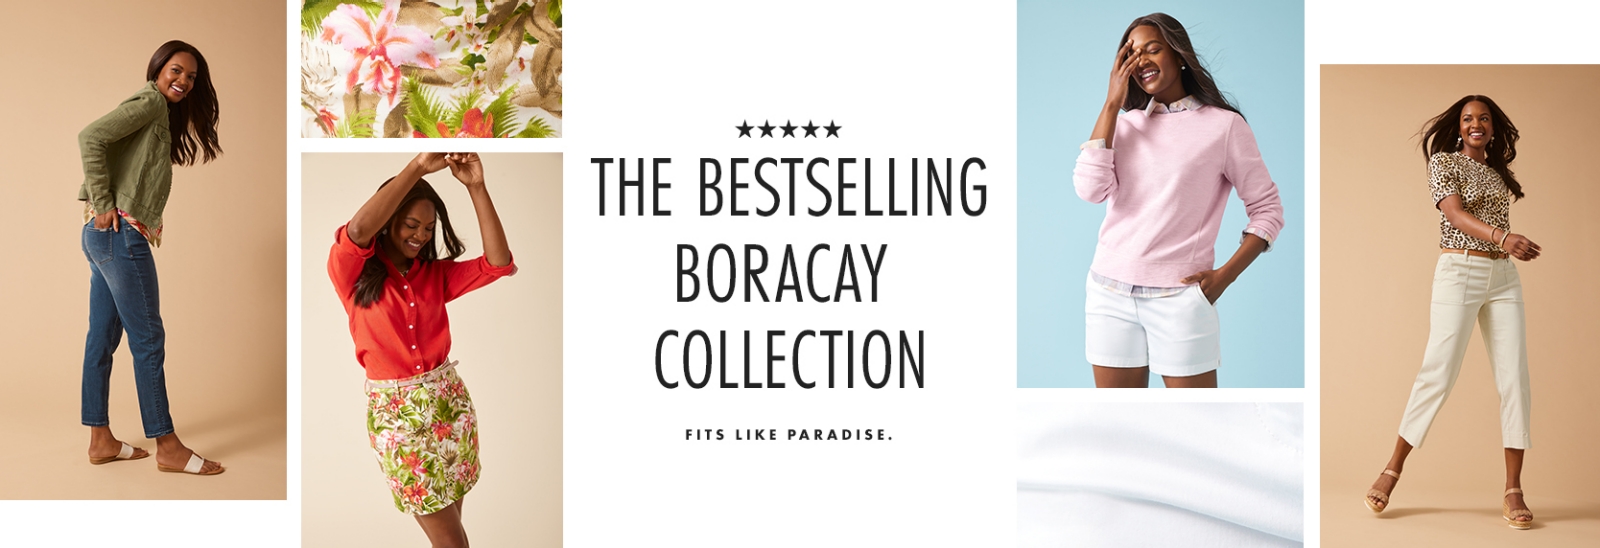 The Bestselling Boracay Collection